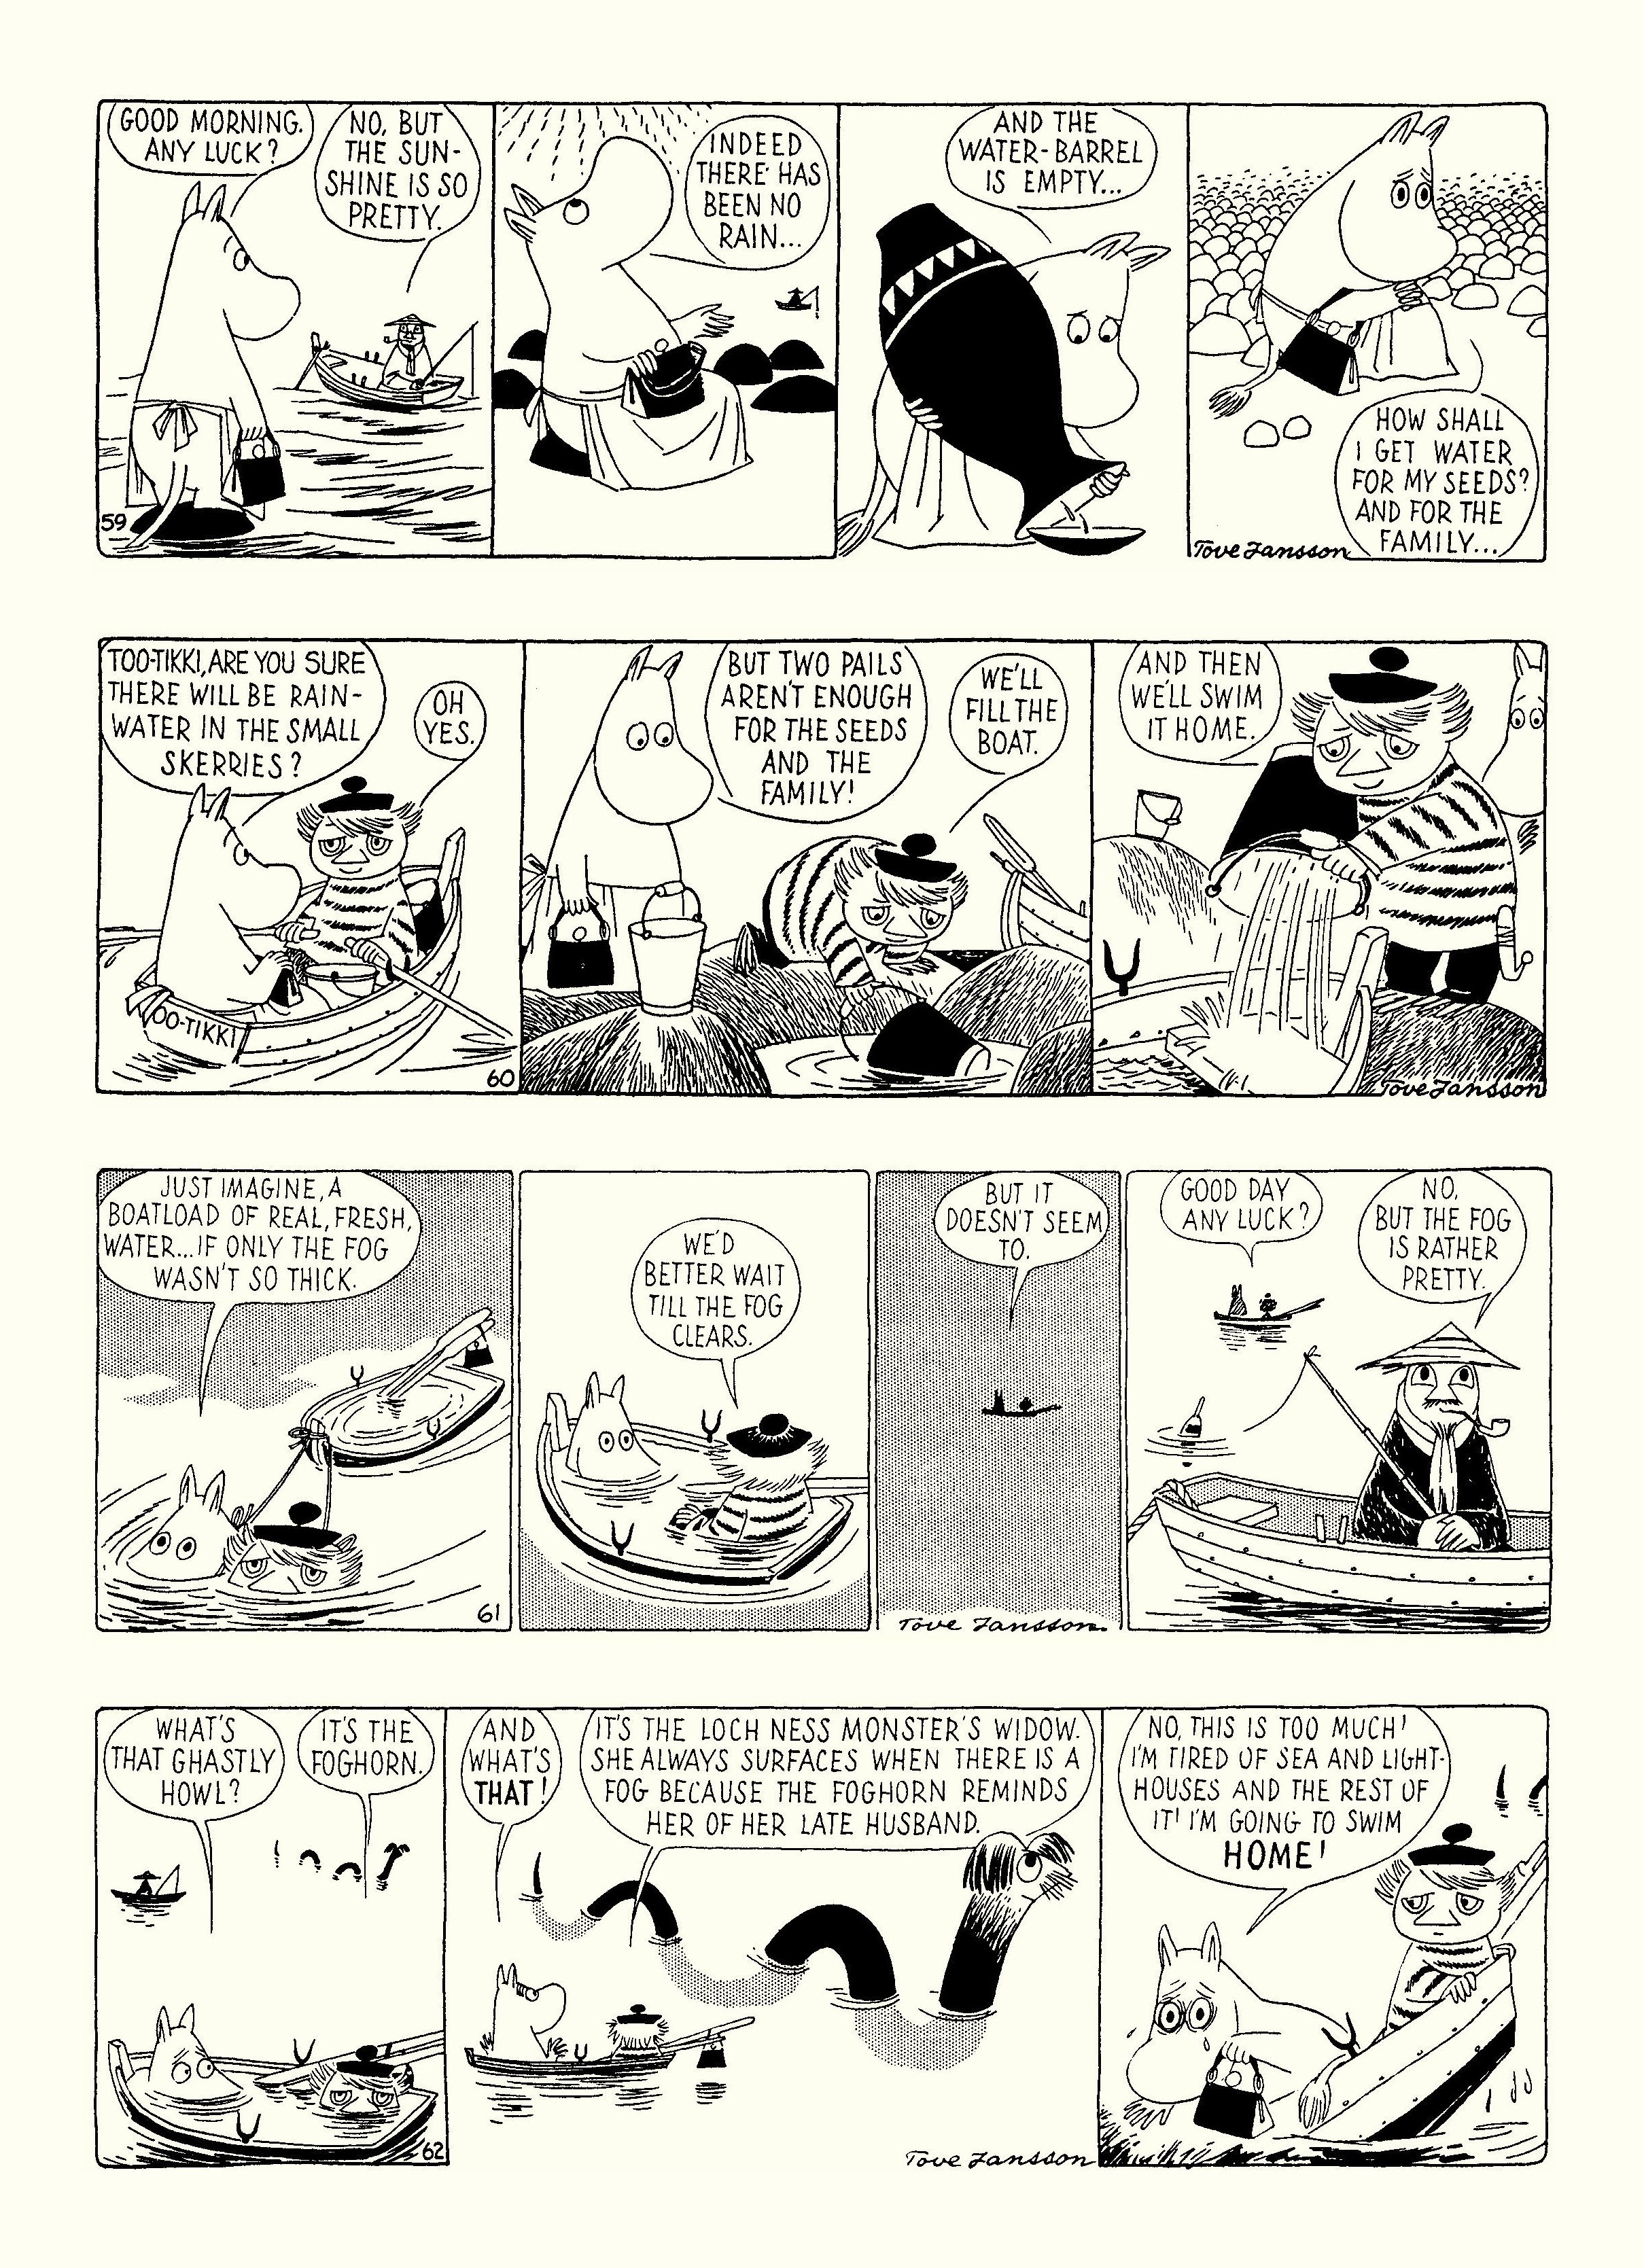 Read online Moomin: The Complete Tove Jansson Comic Strip comic -  Issue # TPB 3 - 70